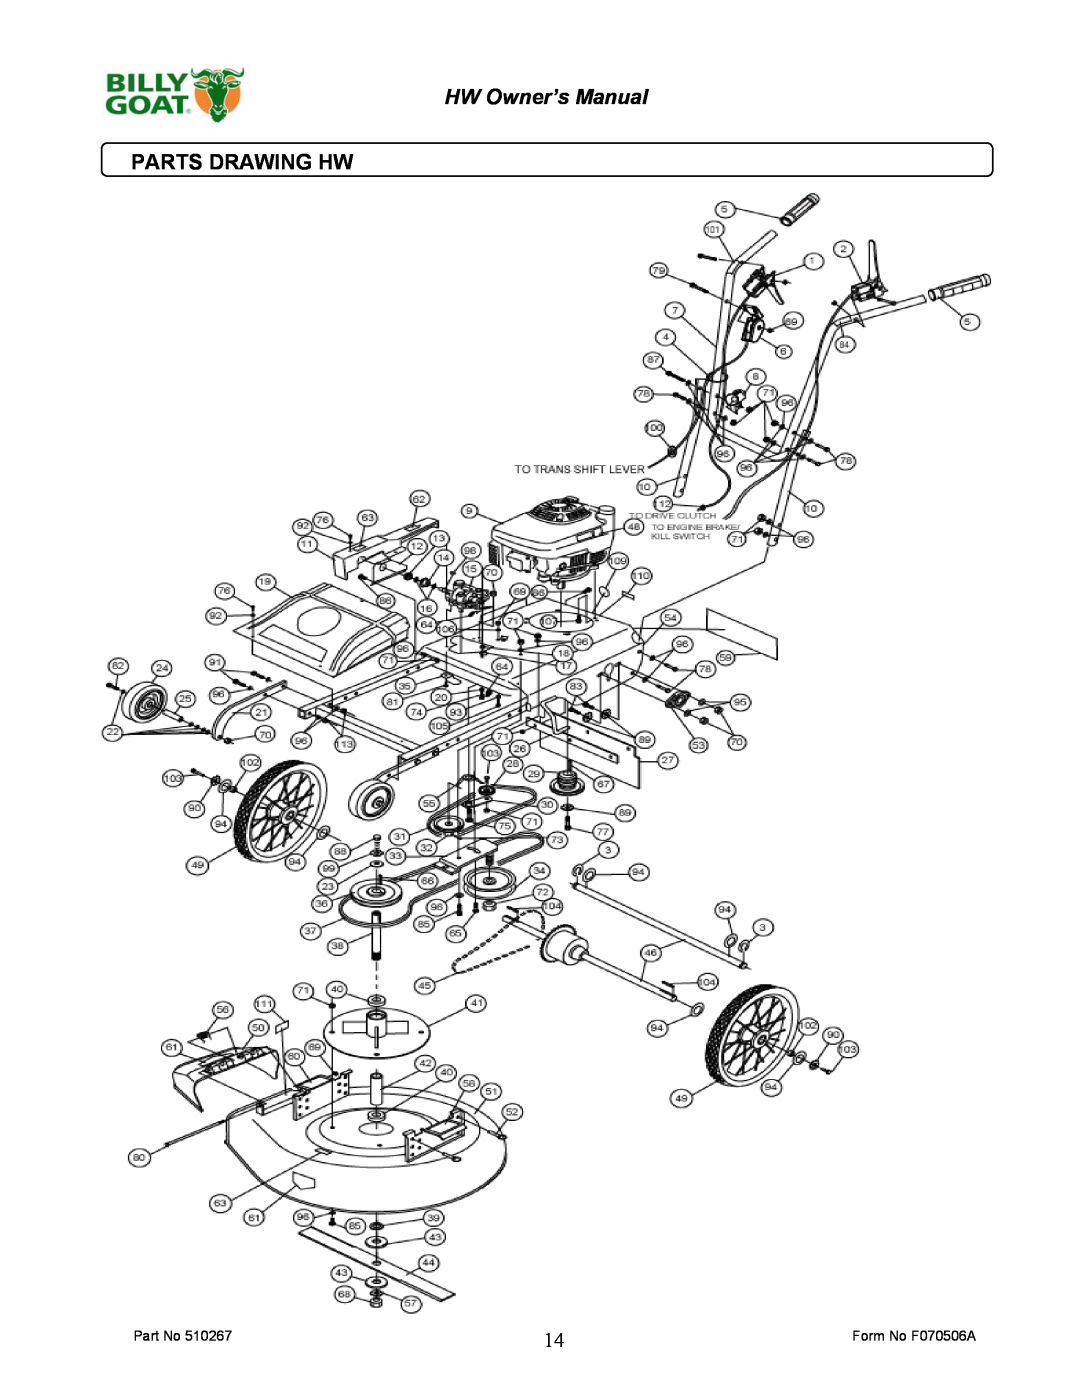 Billy Goat 510223 owner manual Parts Drawing Hw 